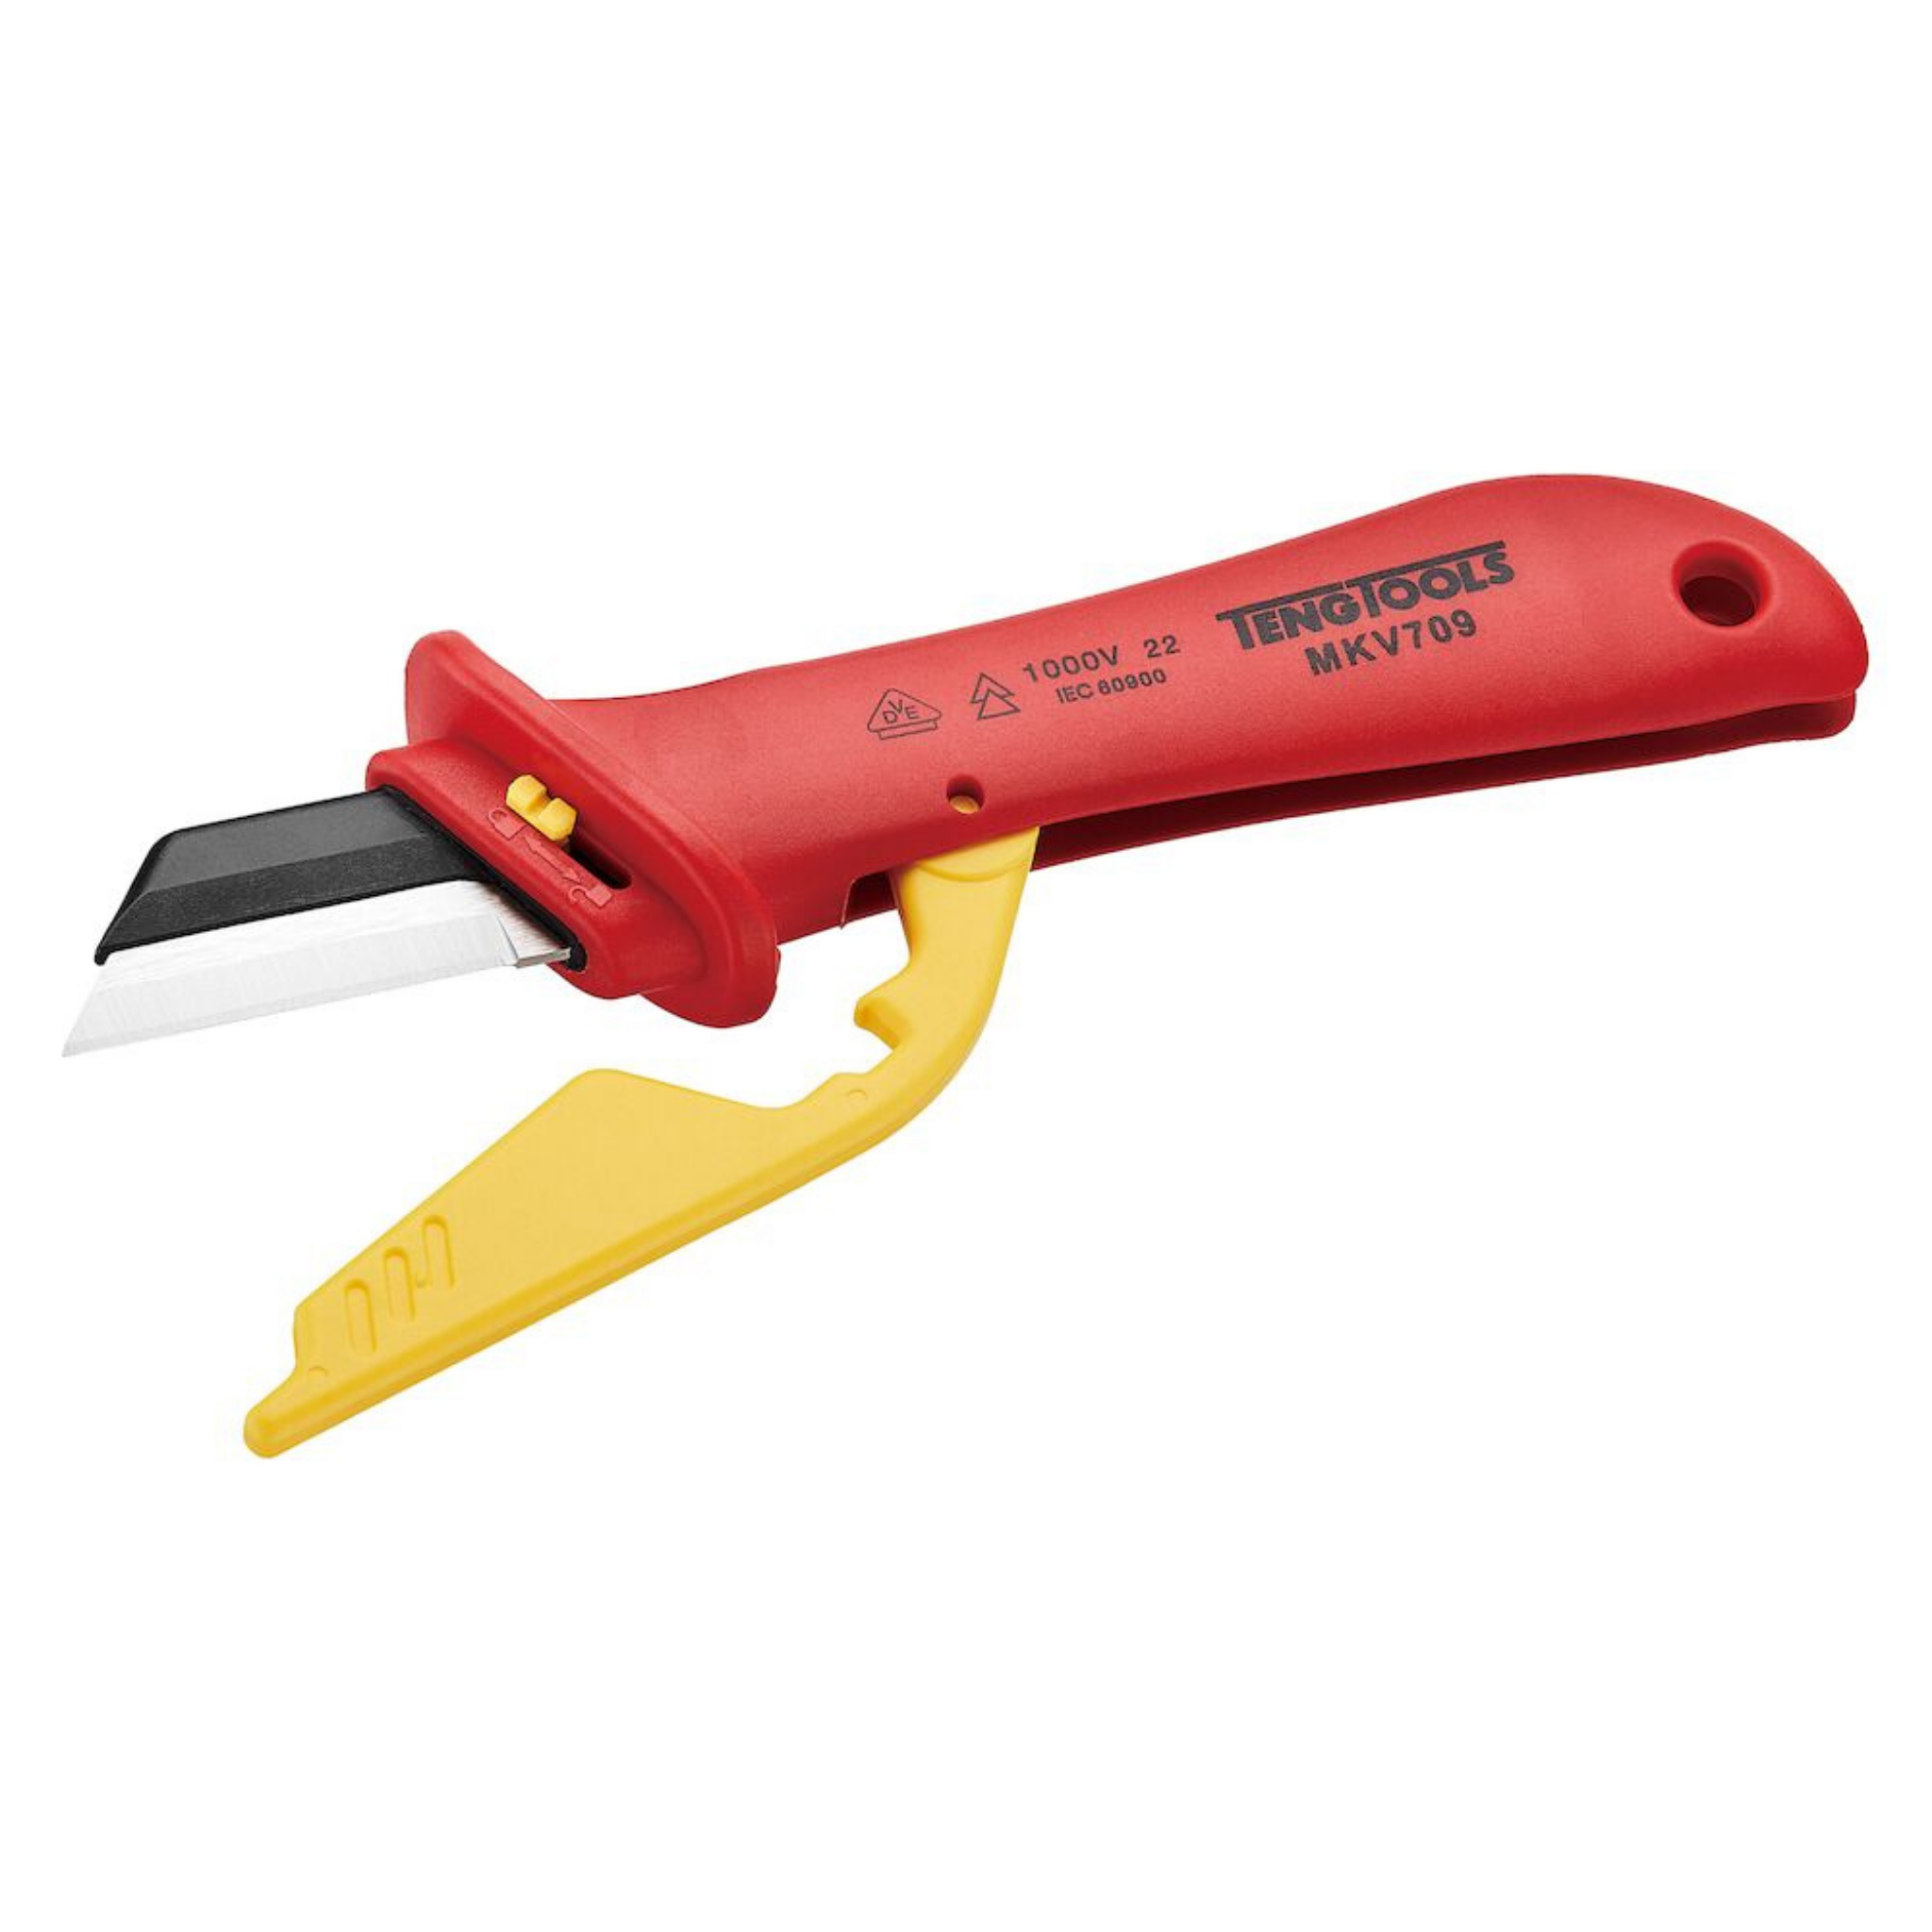 Teng Tools 1000 Volt Insulated Electricians Knife With 1.9 Inch Blade & Blade Protector - MKV709